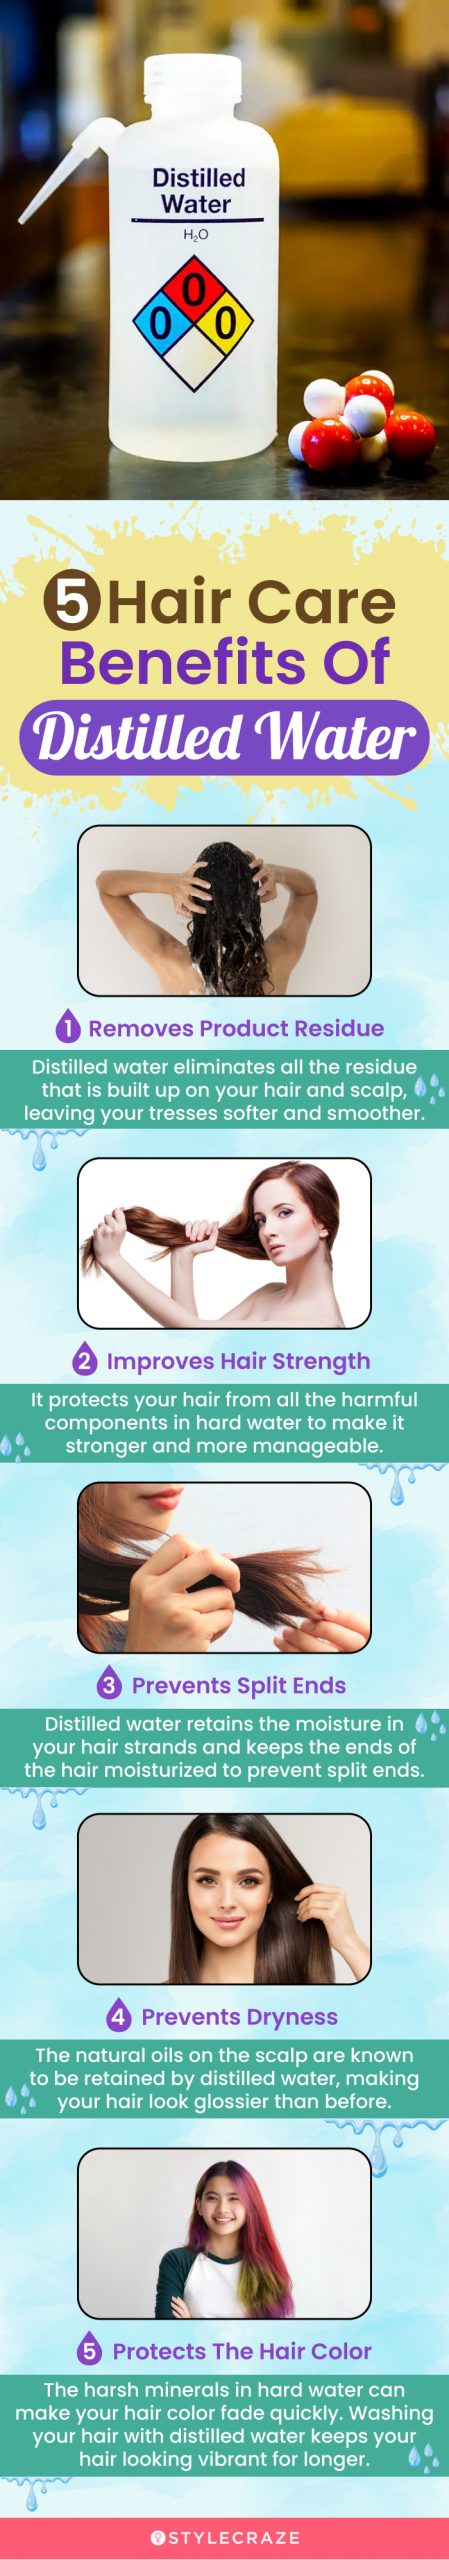 5 hair care benefits of distilled water (infographic)